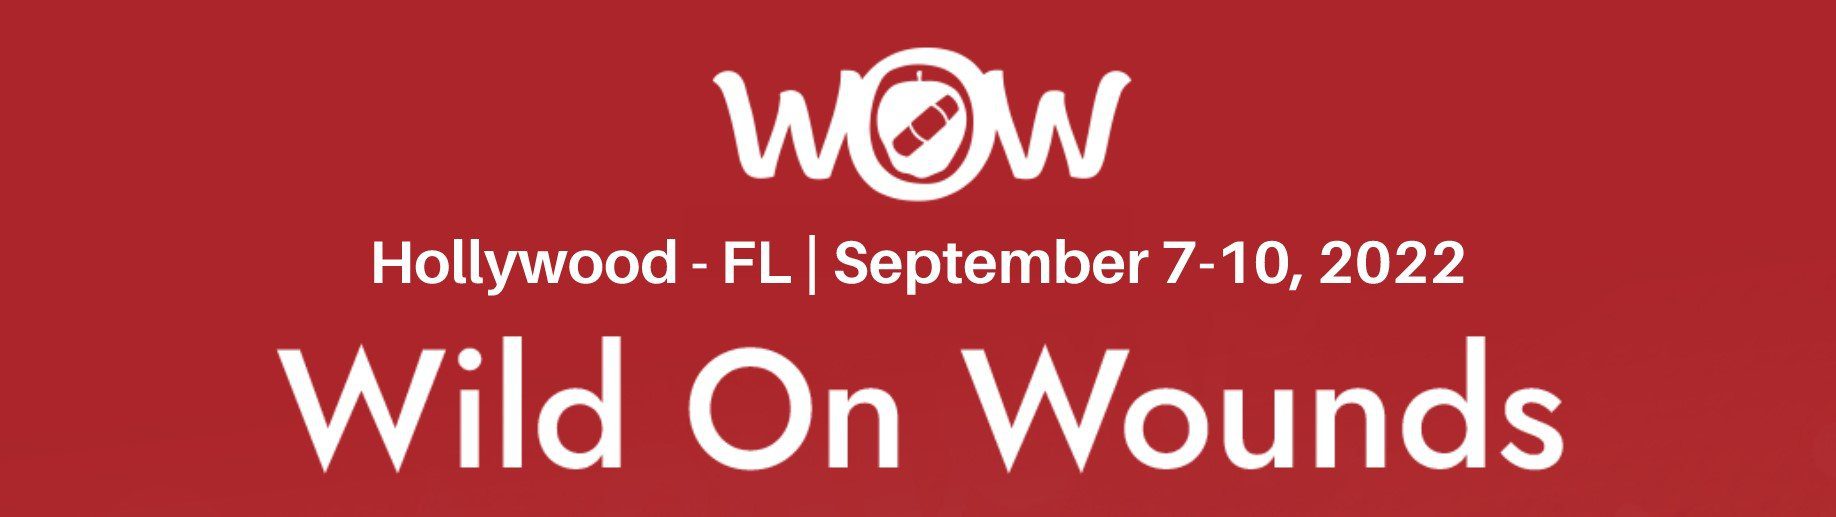 Wound Care Education Institute Wild on Wounds Conference 2022 Kerecis